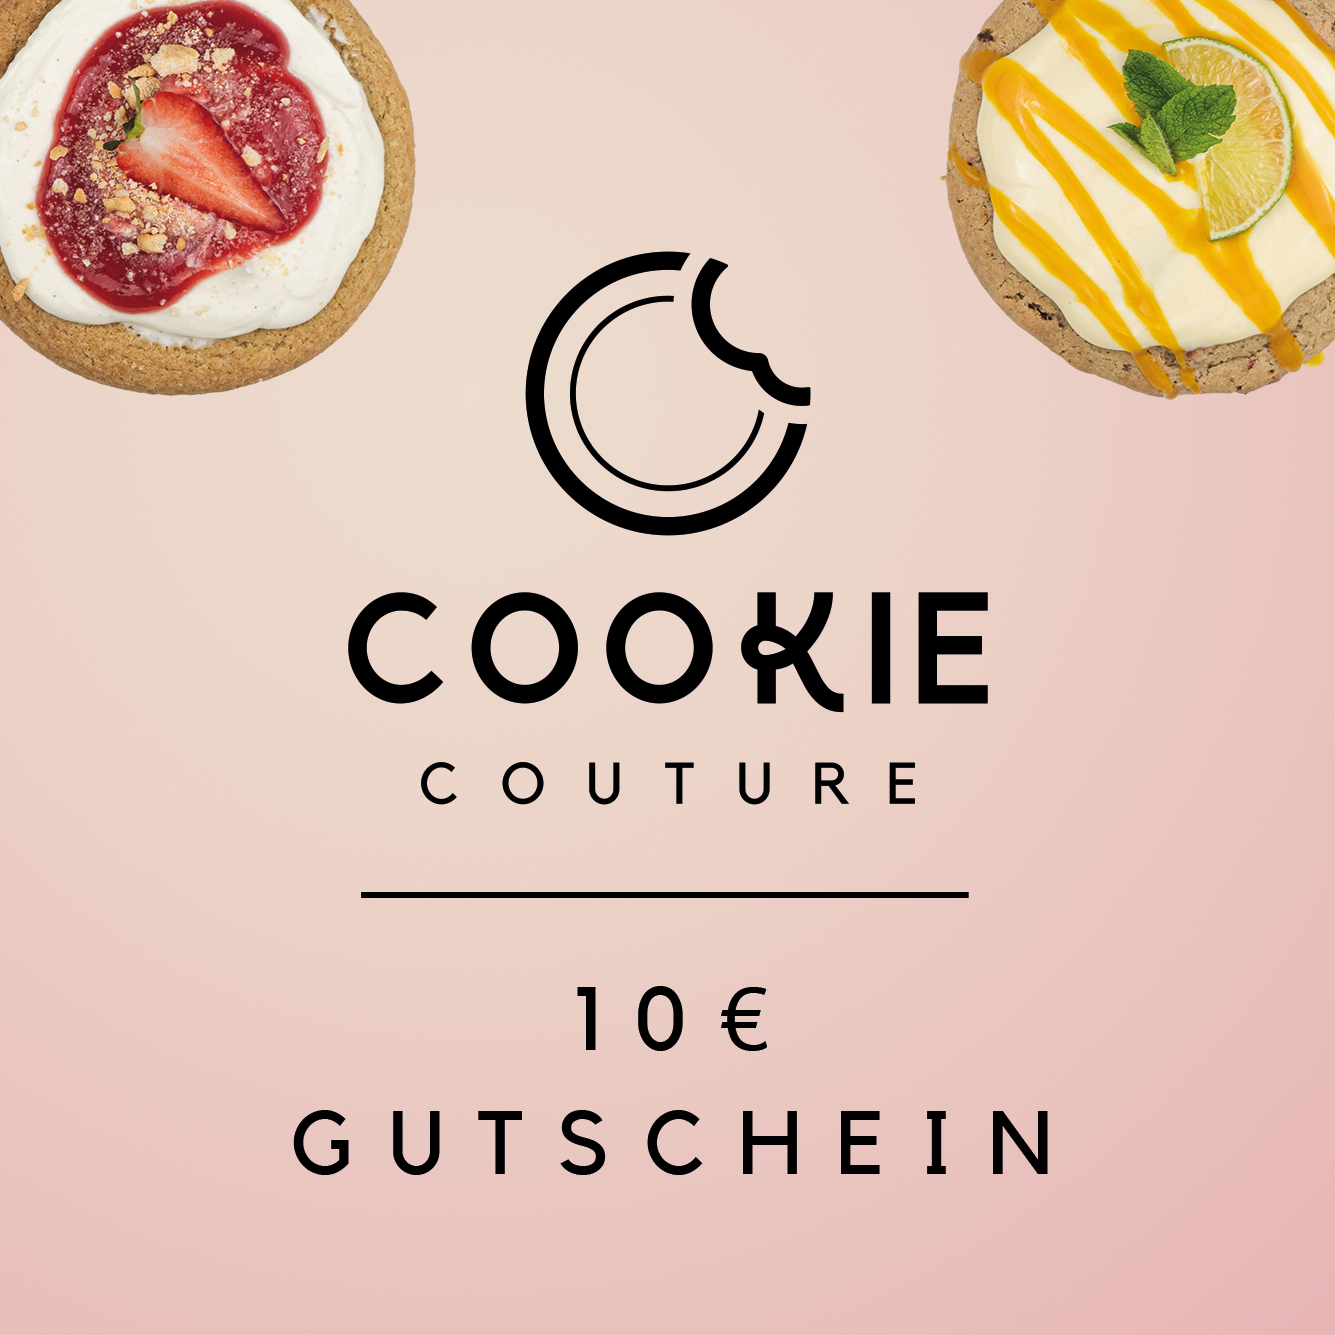 Cookie Couture 10€ Voucher